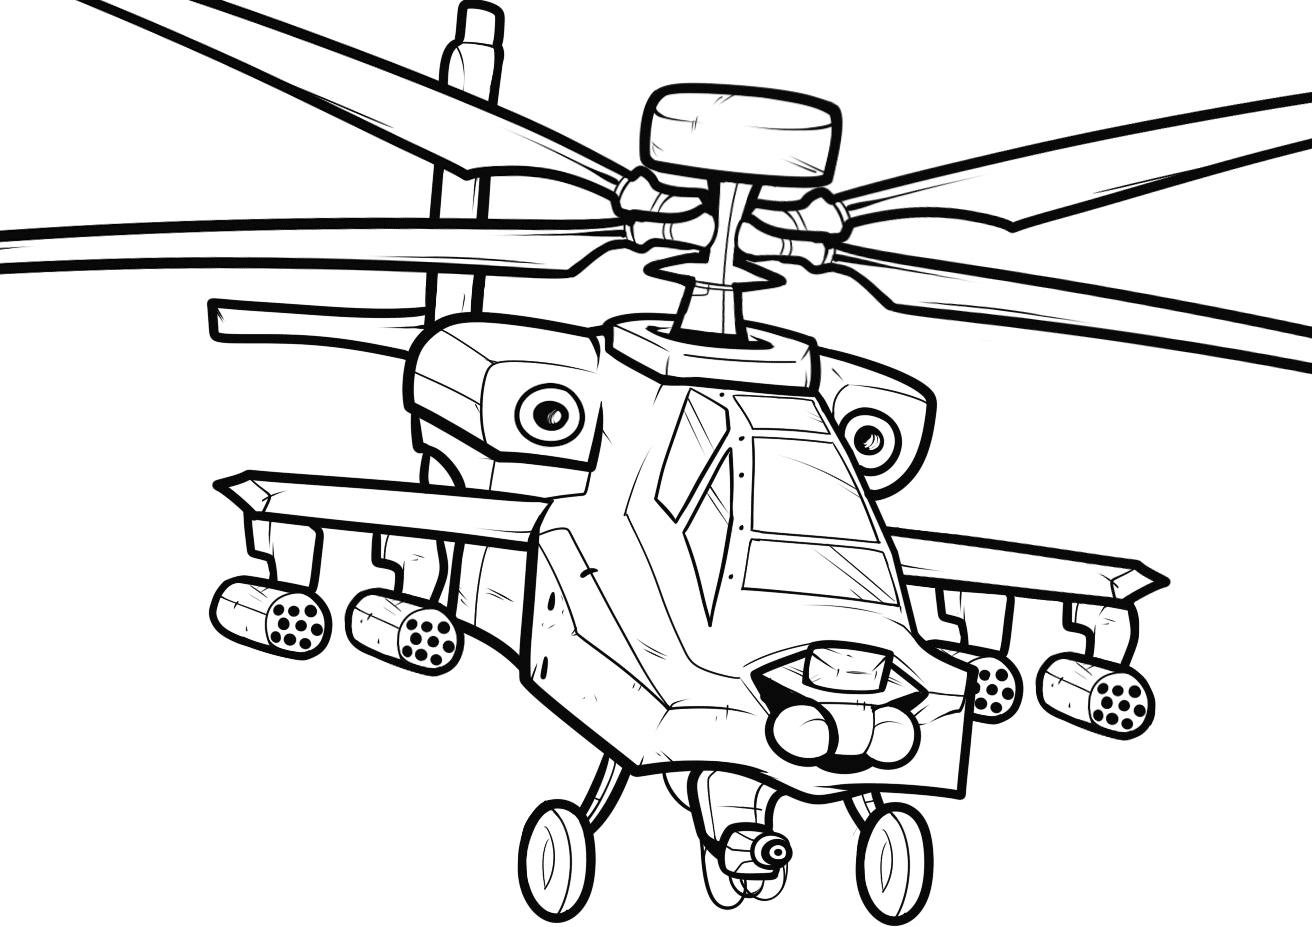 Printable Helicopters With Face Coloring Pages 8